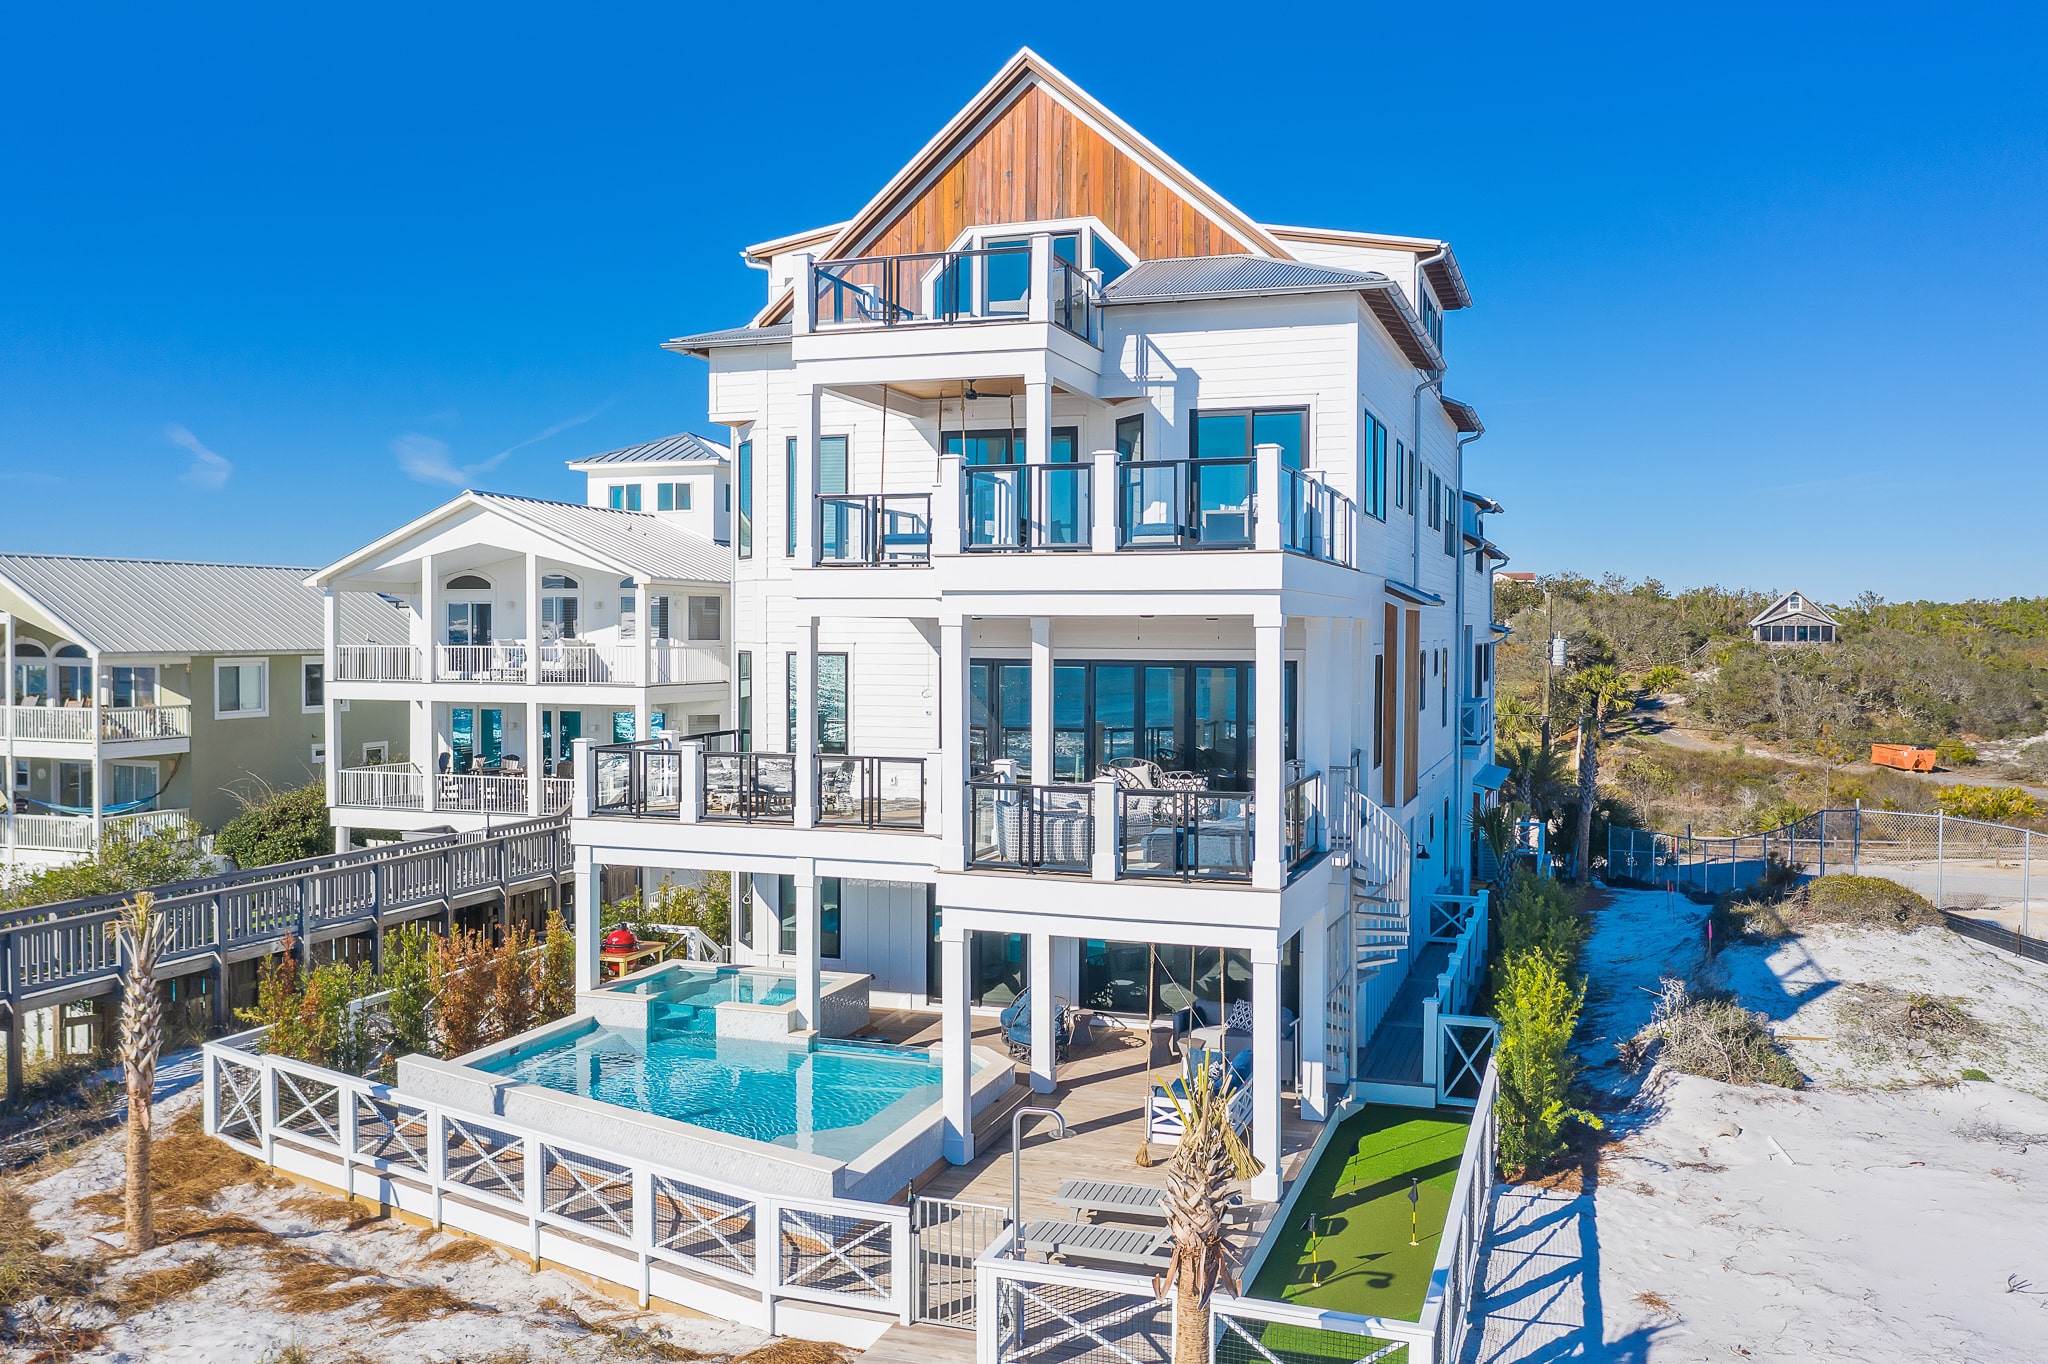 Rosemary Beach, Florida – "30A My Way" is a beachfront paradise with 4 floors of outdoor spaces and private boardwalk access to the beach. Comes with a fully-stocked gourmet kitchen.